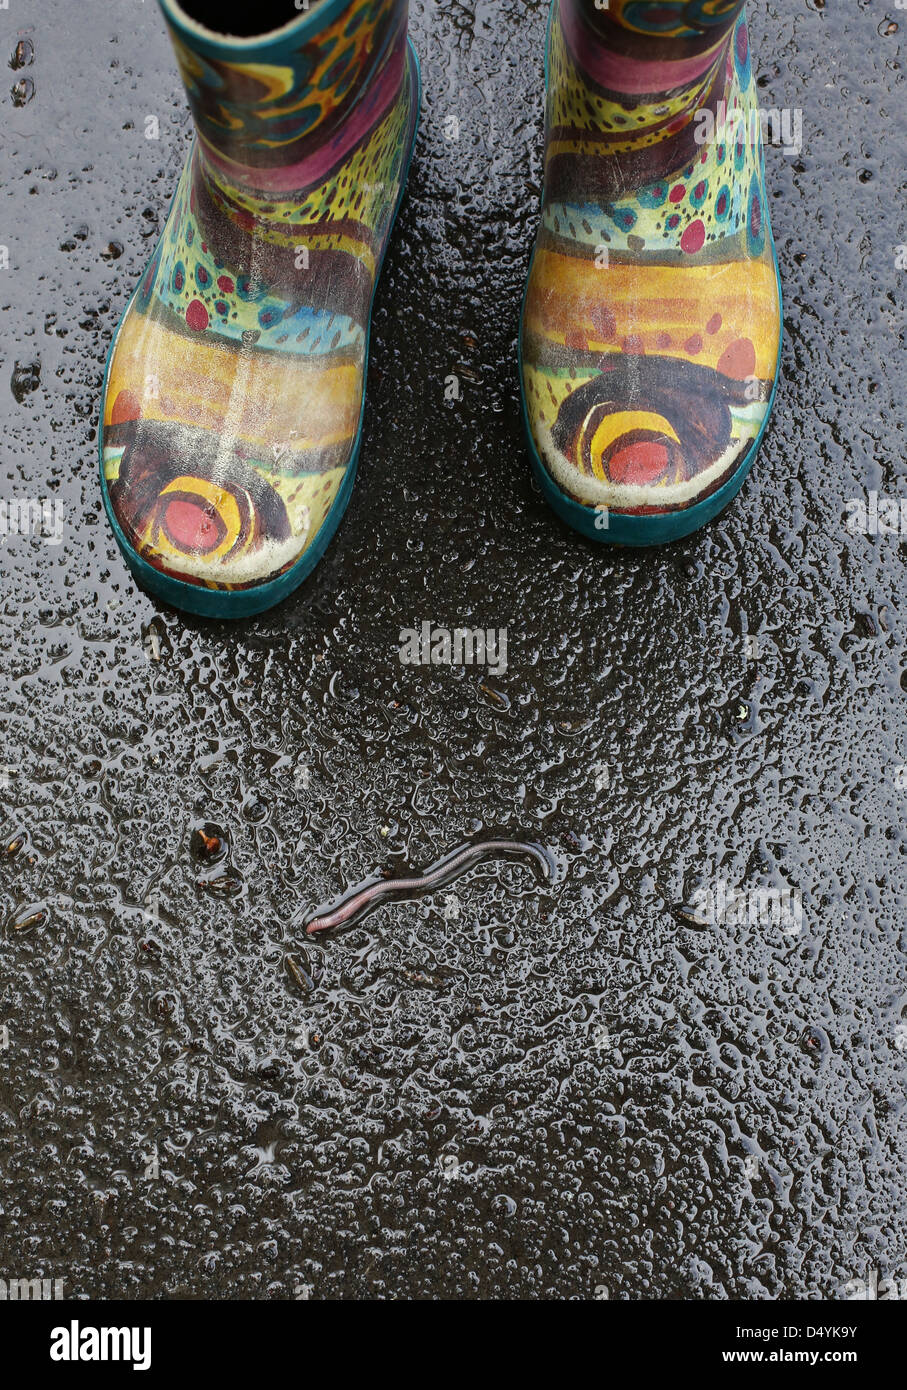 A child in rain boots standing next to a worm. Stock Photo